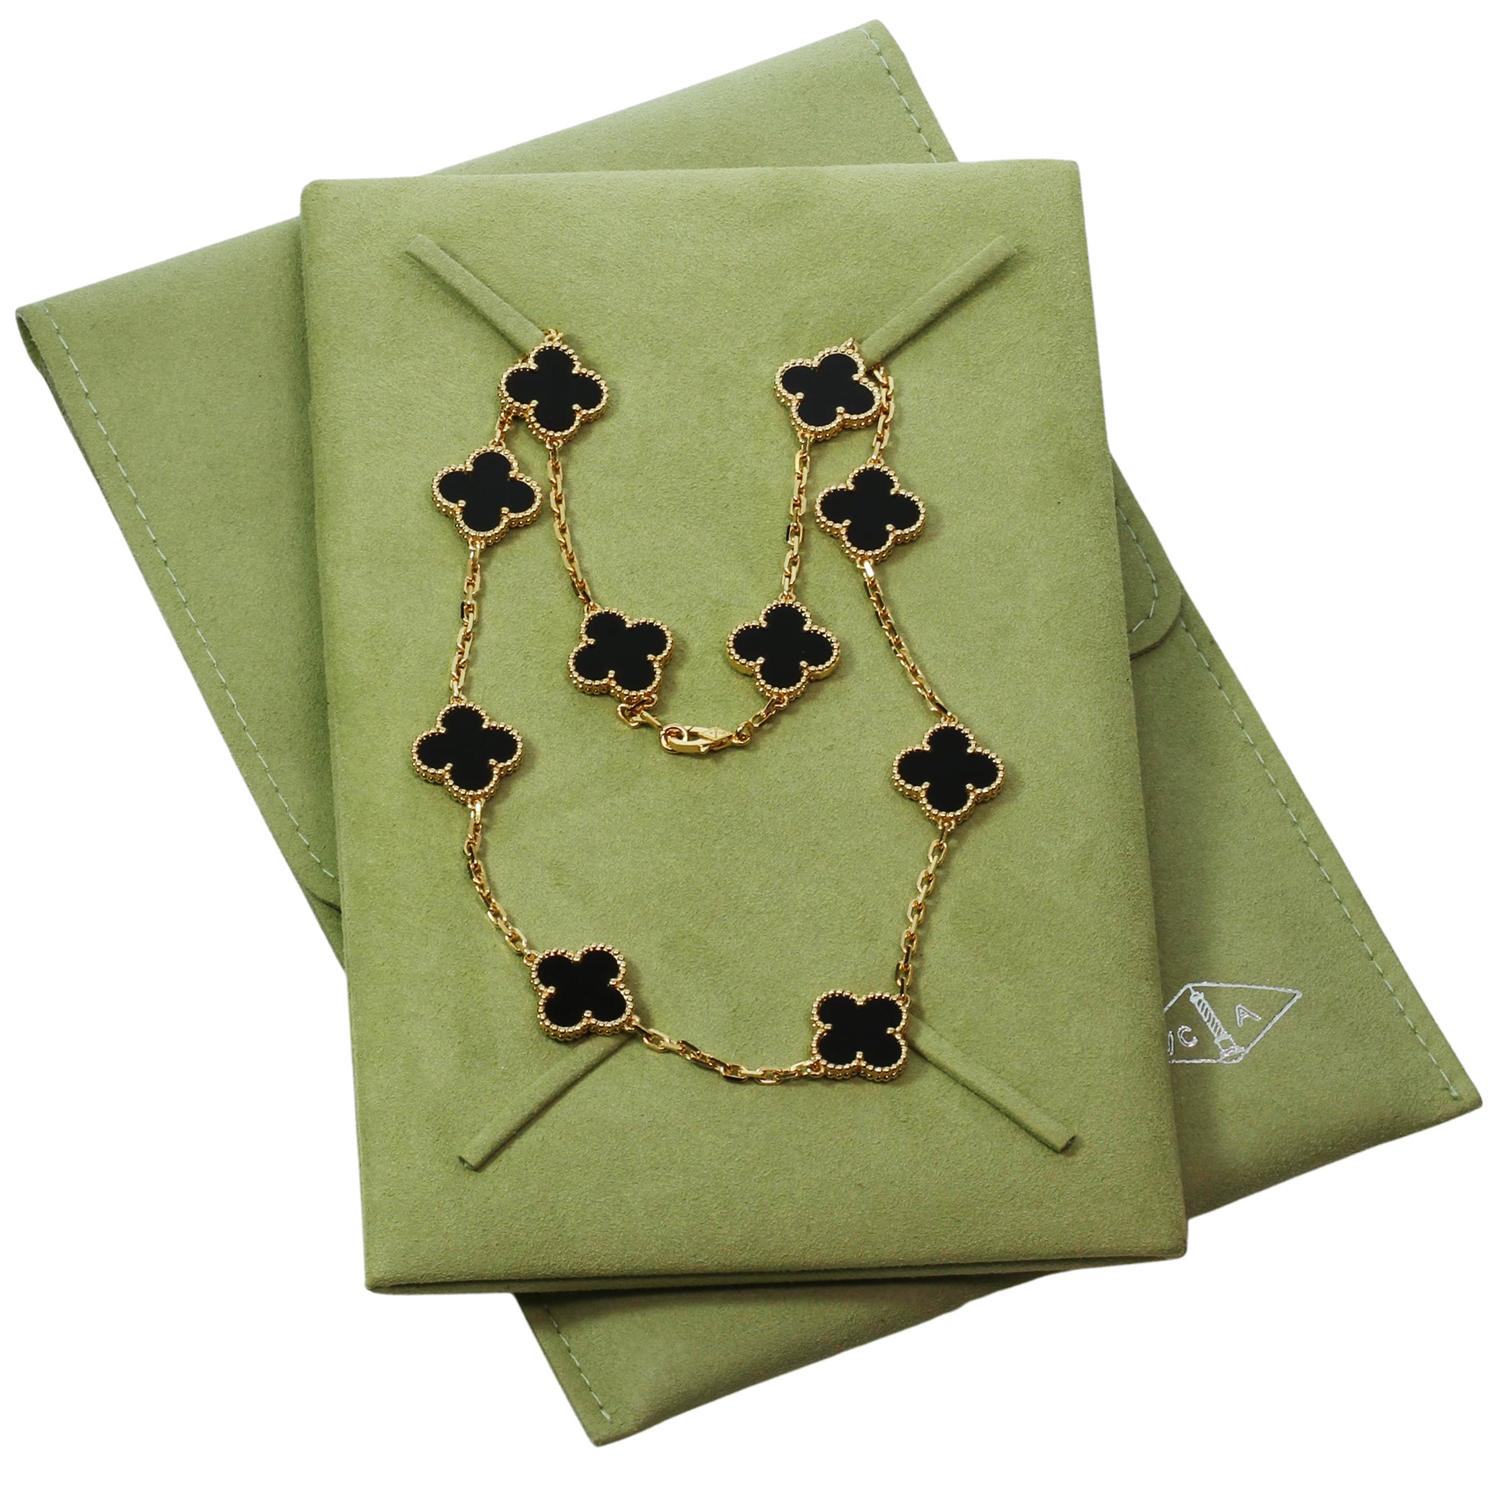 This classic Van Cleef & Arpels necklace is crafted in 18k yellow gold and features 10 lucky clover motifs elegantly inlaid with onyx in round bead settings. Made in France circa 2010s. Measurements: 0.59